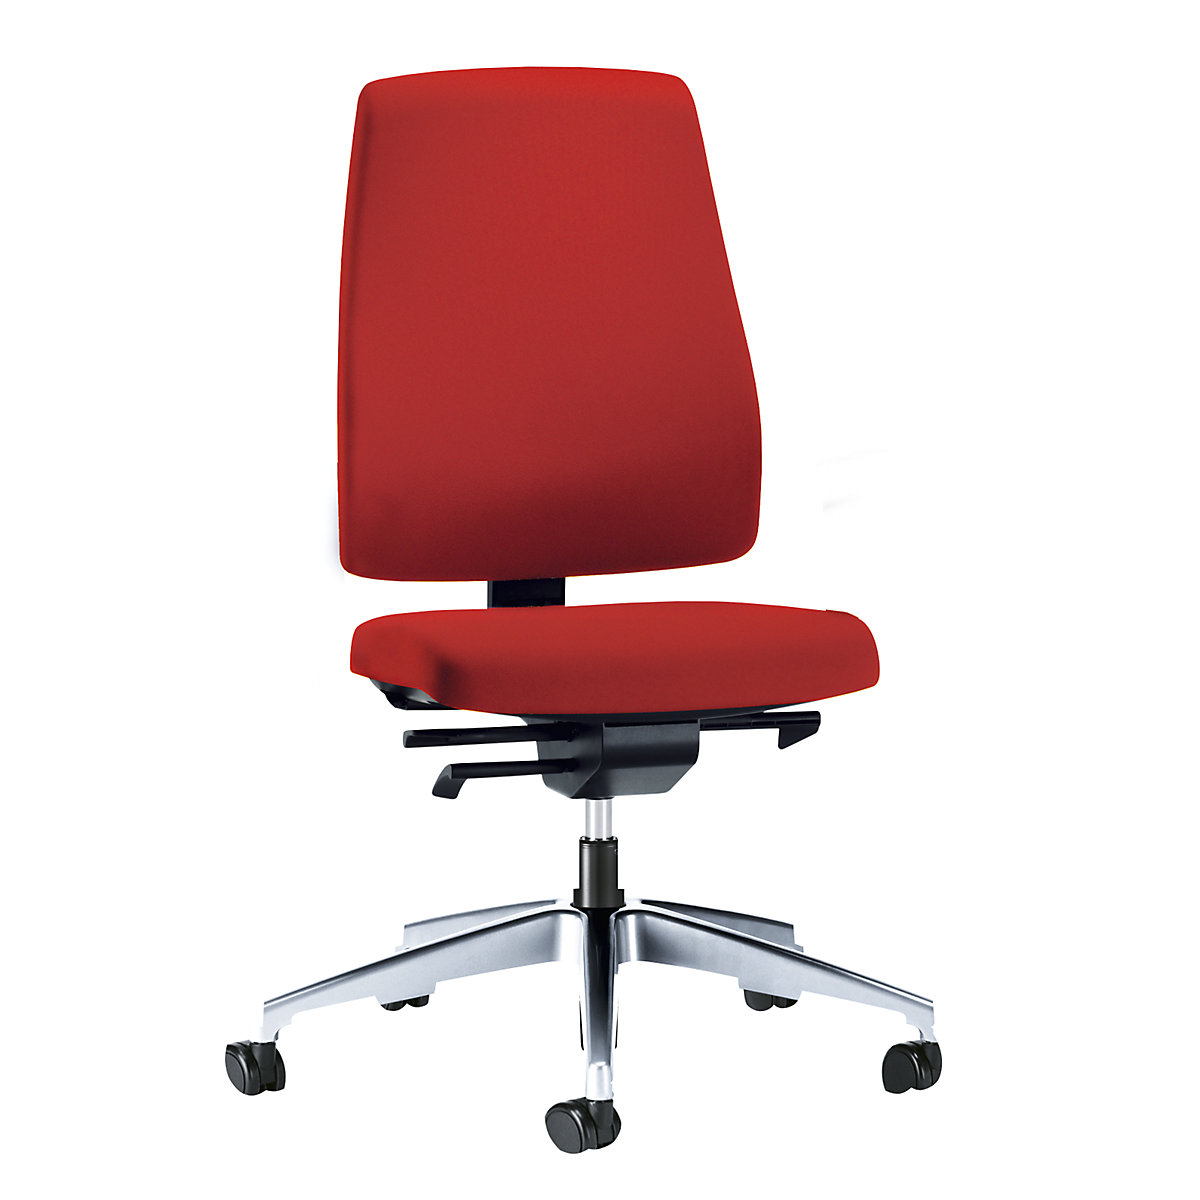 GOAL office swivel chair, back rest height 530 mm – interstuhl, polished frame, with soft castors, flame red, seat depth 410 mm-5